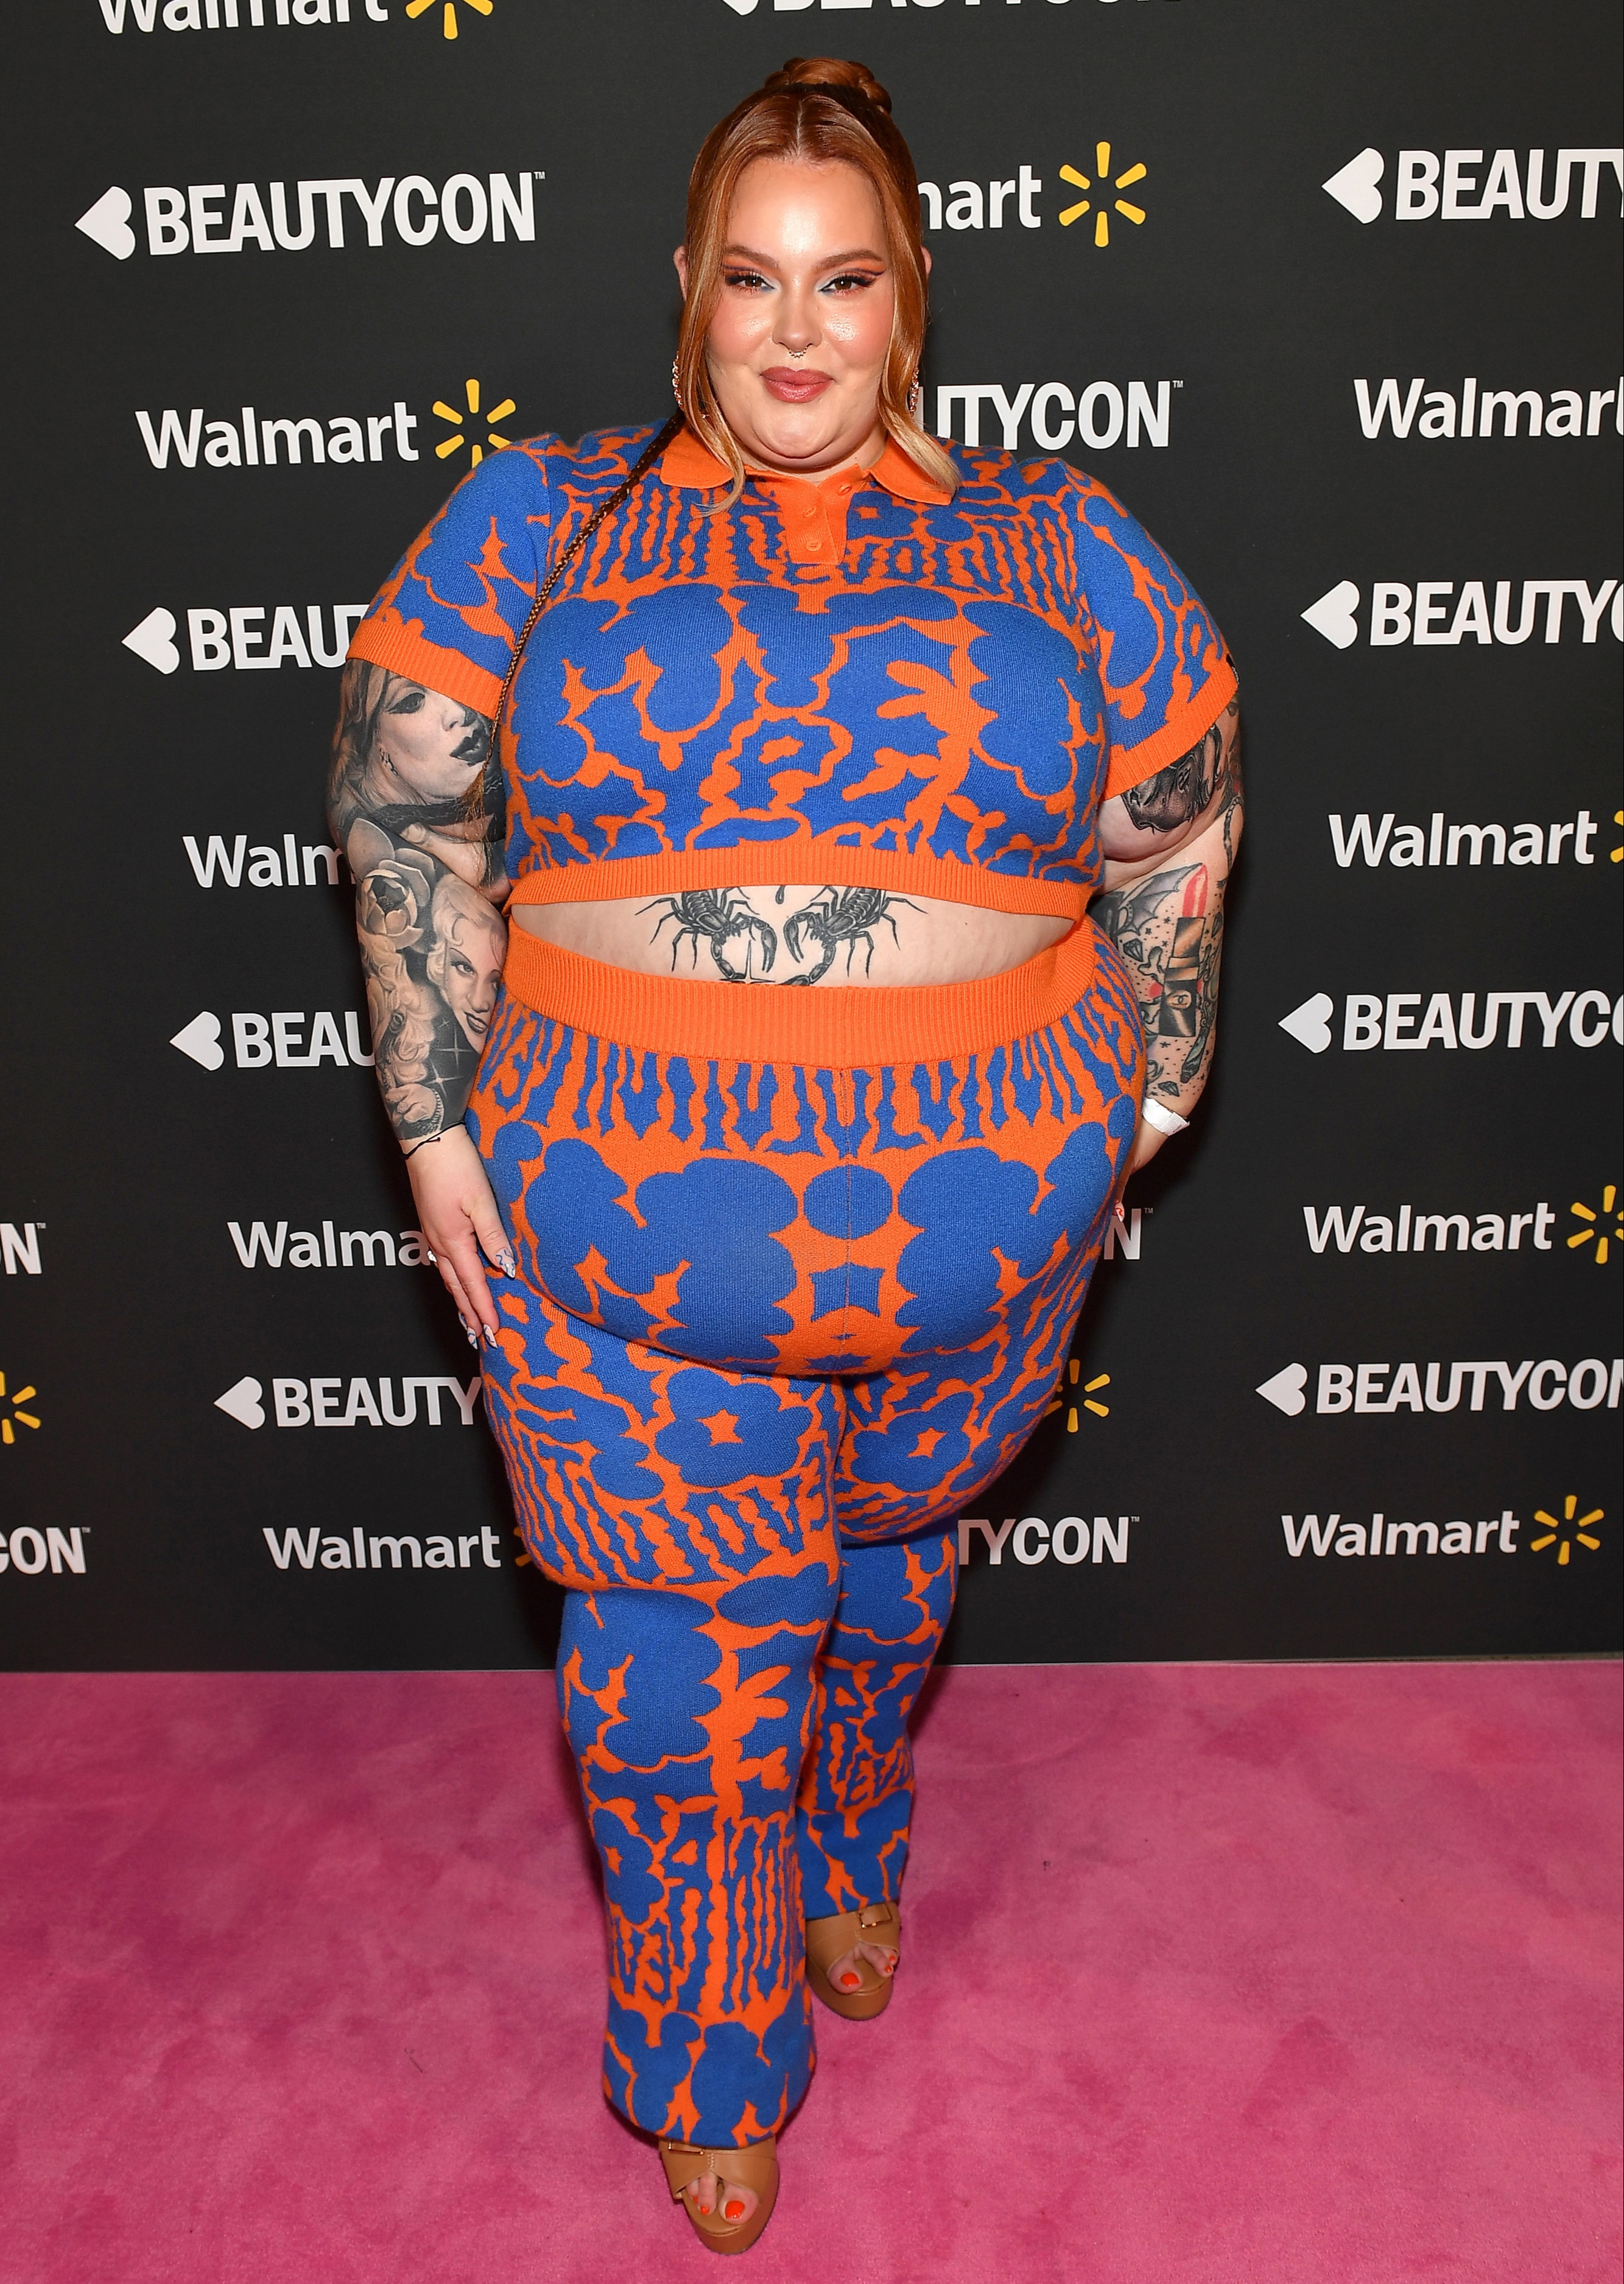 Body Positive influencer Tess Holliday is 'not just obese, she’s suffering from morbid obesity'